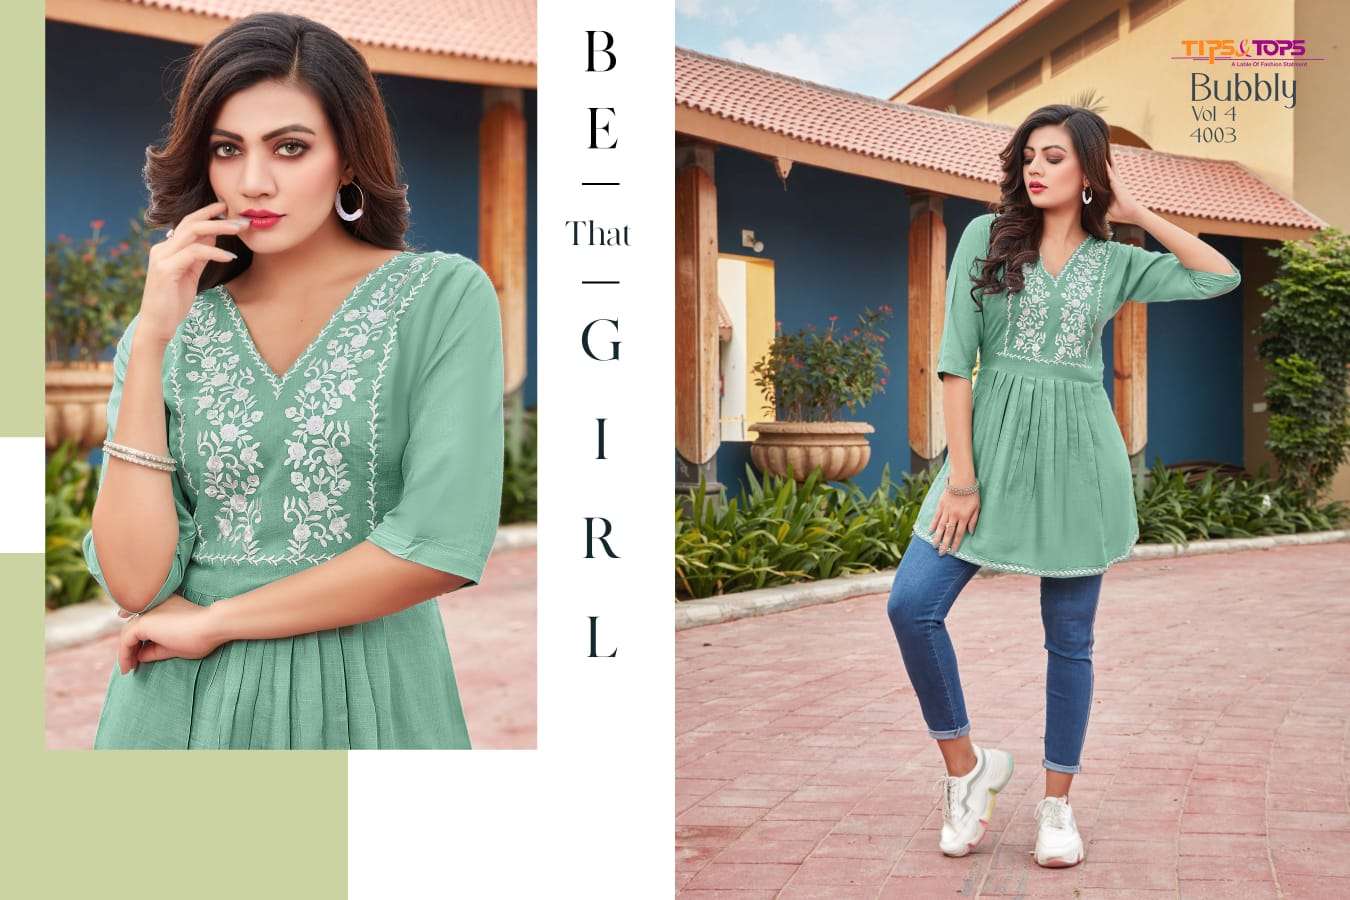 Tips & Tops Bubbly Vol 4 Catalog Western Wear Top Online Available In Wholesale 